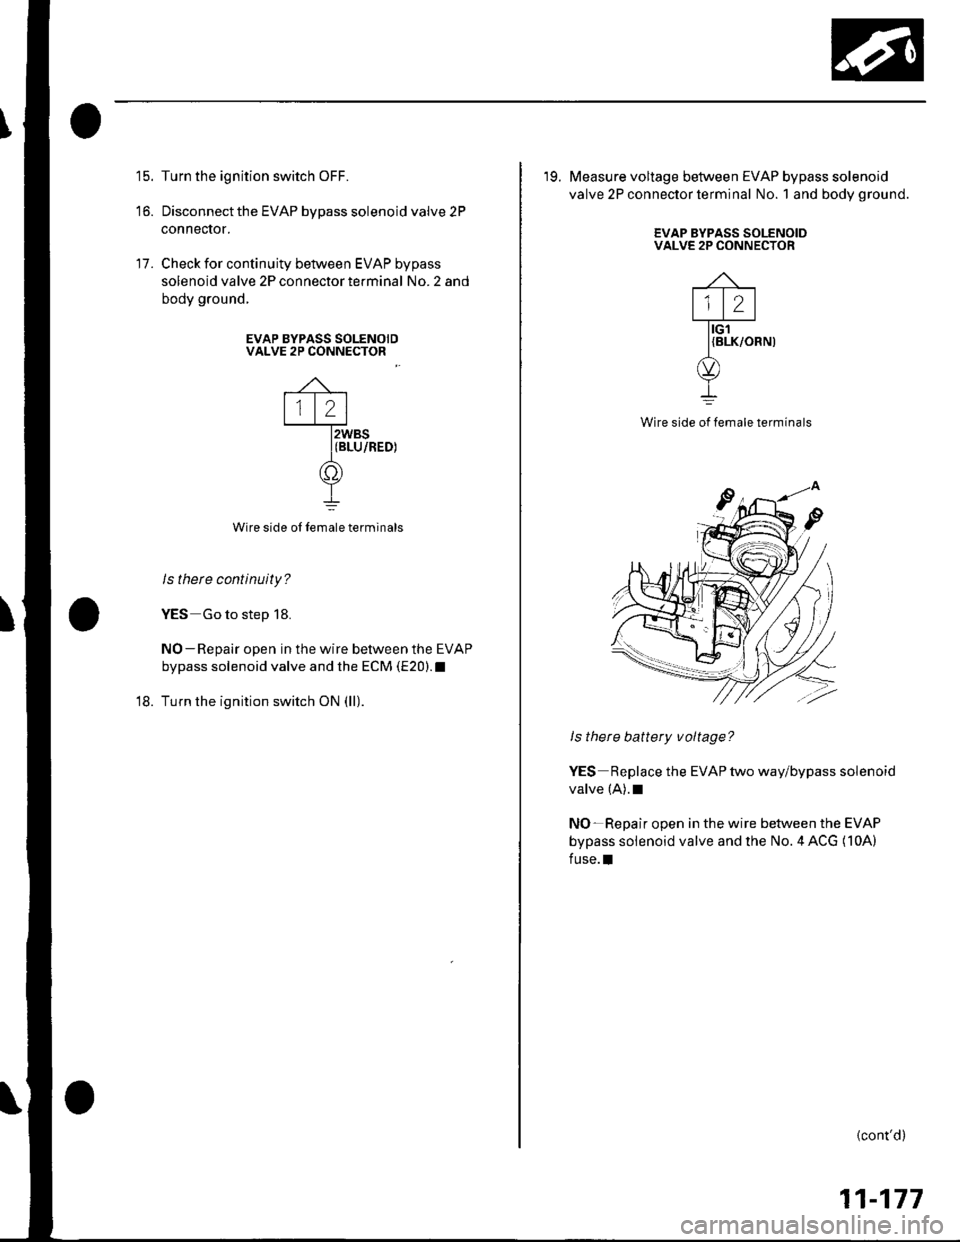 HONDA CIVIC 2002 7.G Service Manual 15.
to.
Turn the ignition switch OFF.
Disconnect the EVAP bypass solenoid valve 2P
connecror.
Check for continuity between EVAP bypass
solenoid valve 2P connector terminal No. 2 and
body ground.
17.
E